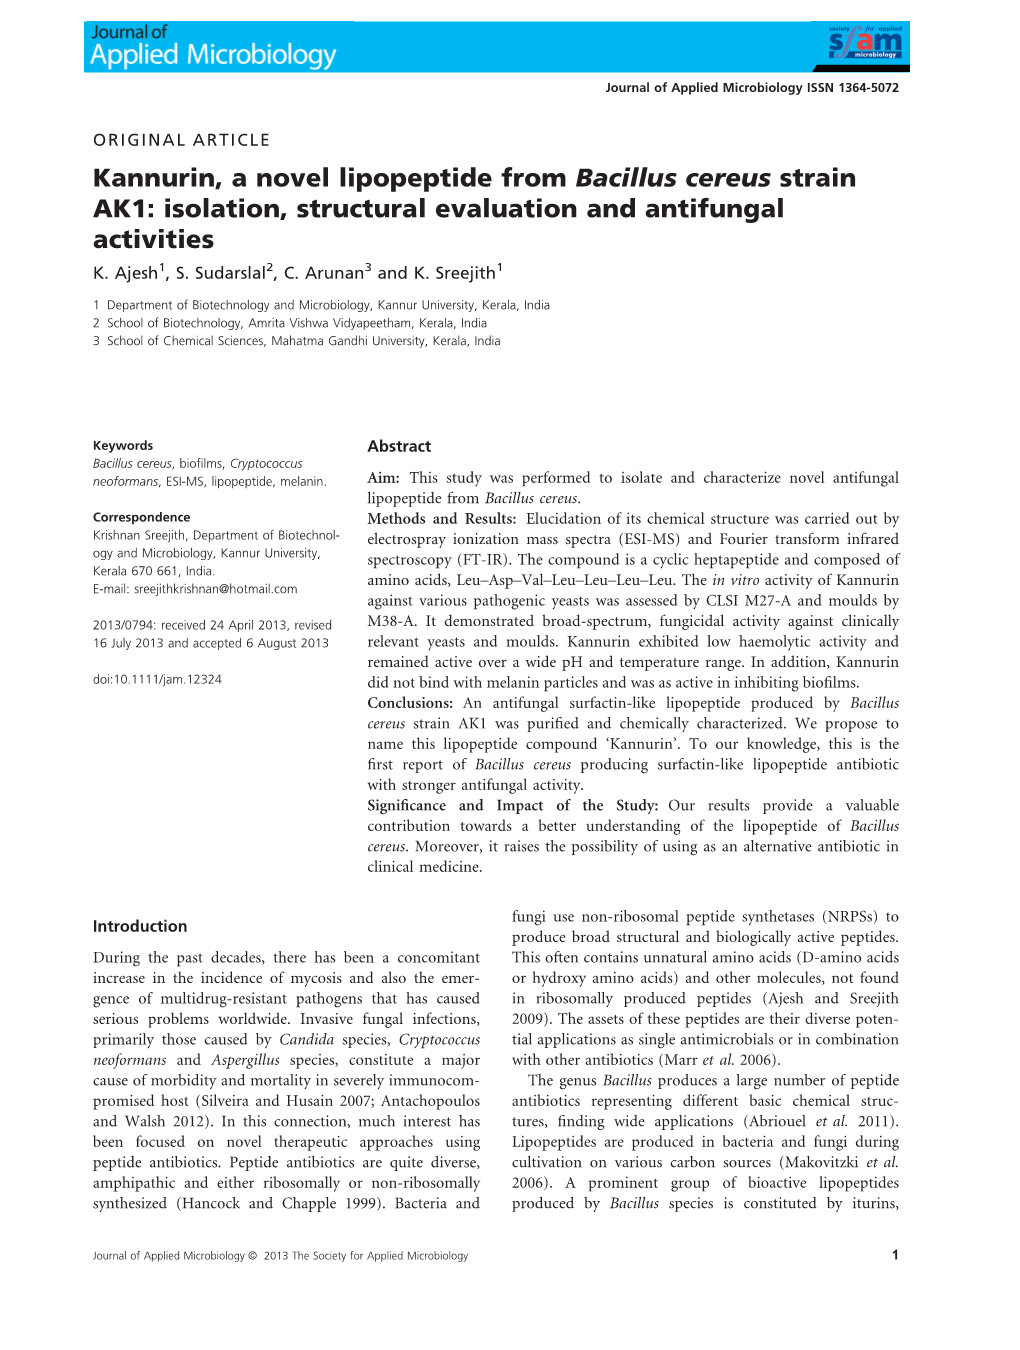 Kannurin, a Novel Lipopeptide from Bacillus Cereus Strain AK1: Isolation, Structural Evaluation and Antifungal Activities K